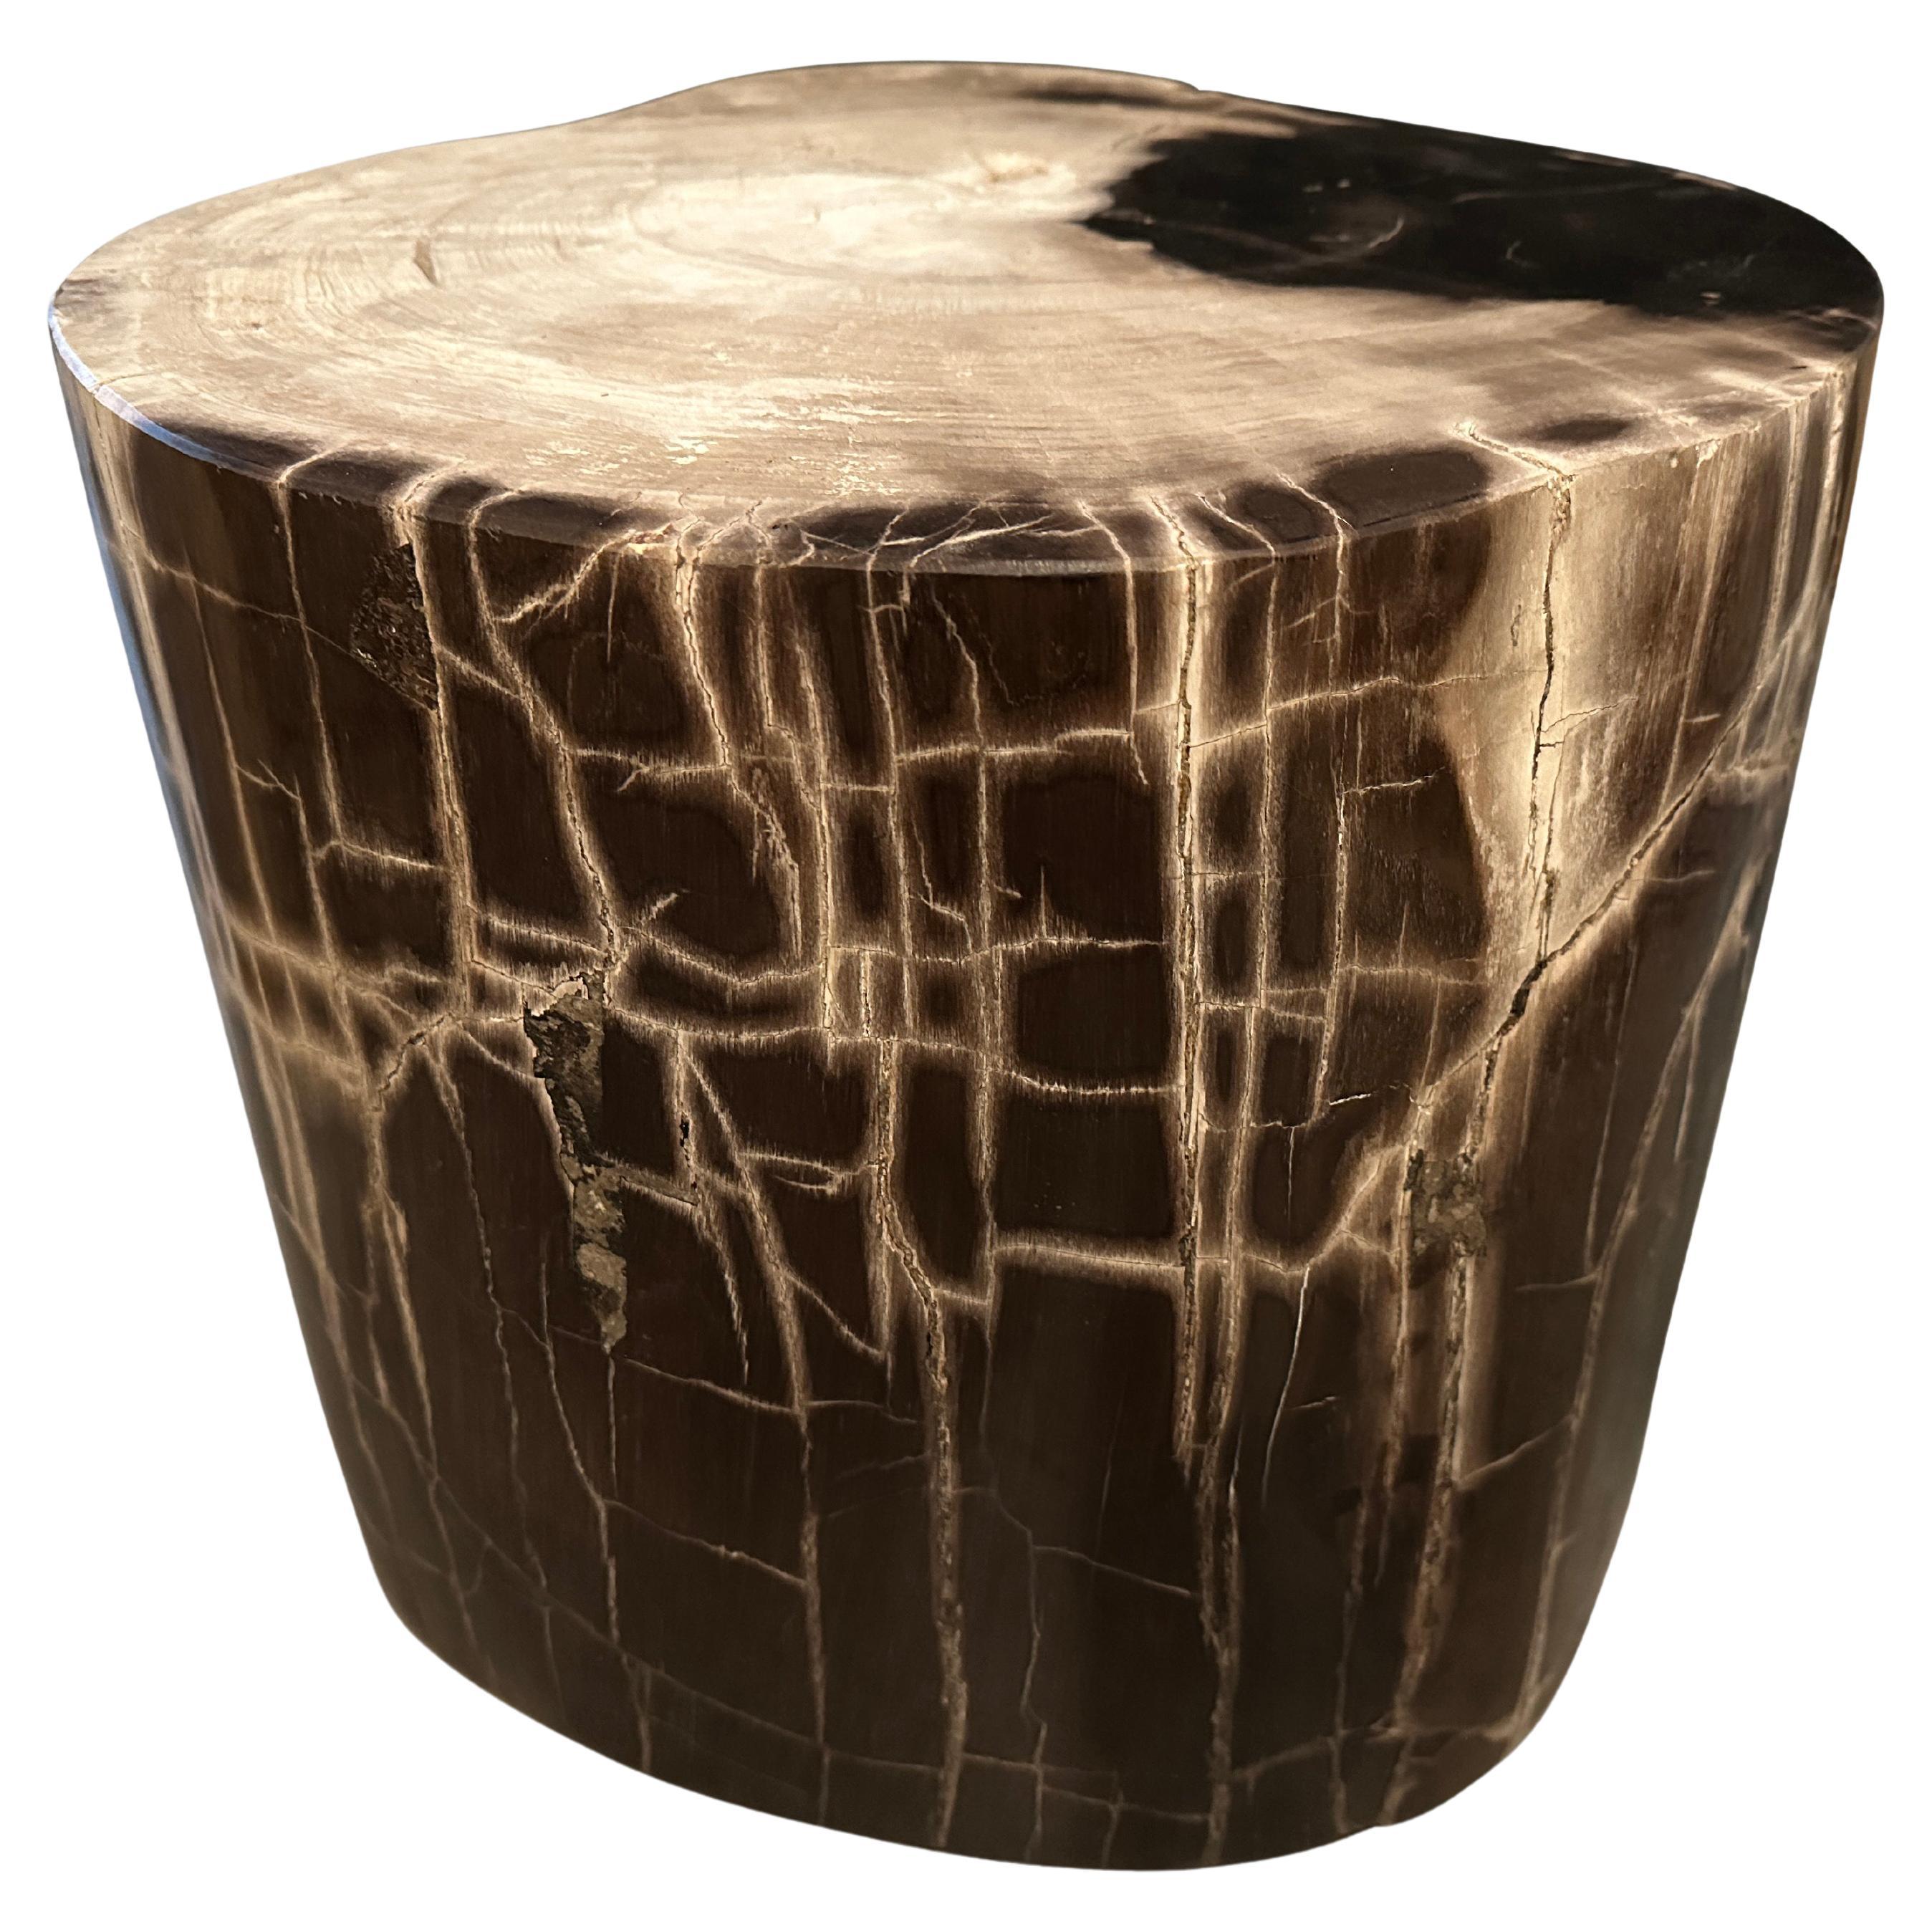 Andrianna Shamaris Exquisite High Quality Petrified Wood Side Table For Sale